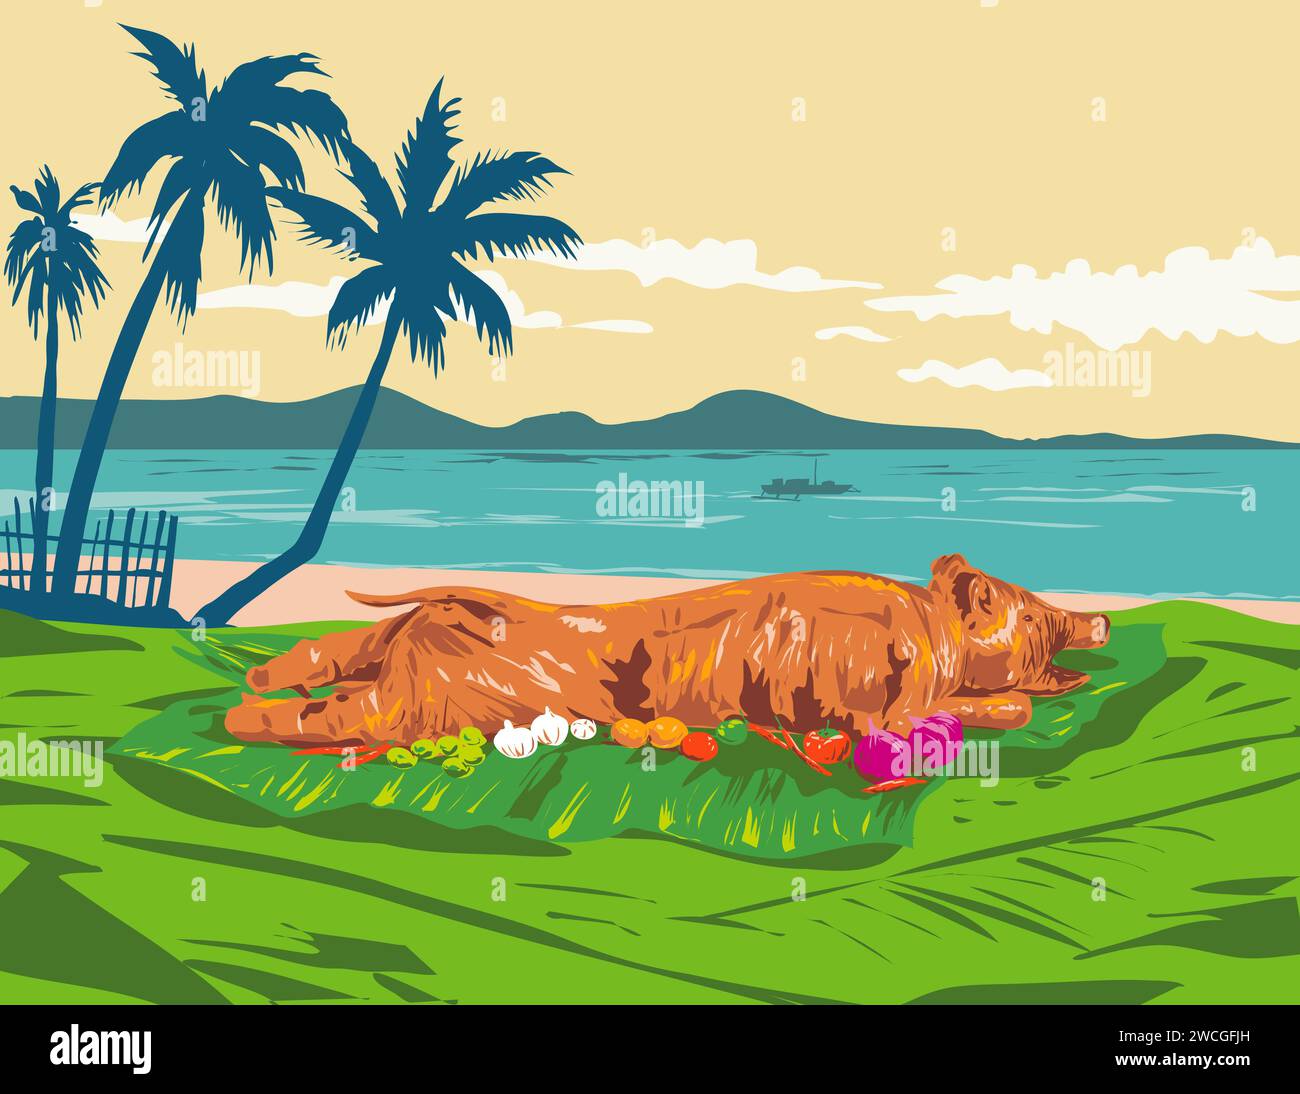 Art Deco or WPA poster art of a lechon, litson  or roasted suckling pig at the beach in Talisay City, Cebu, Philippines done in works project administ Stock Photo